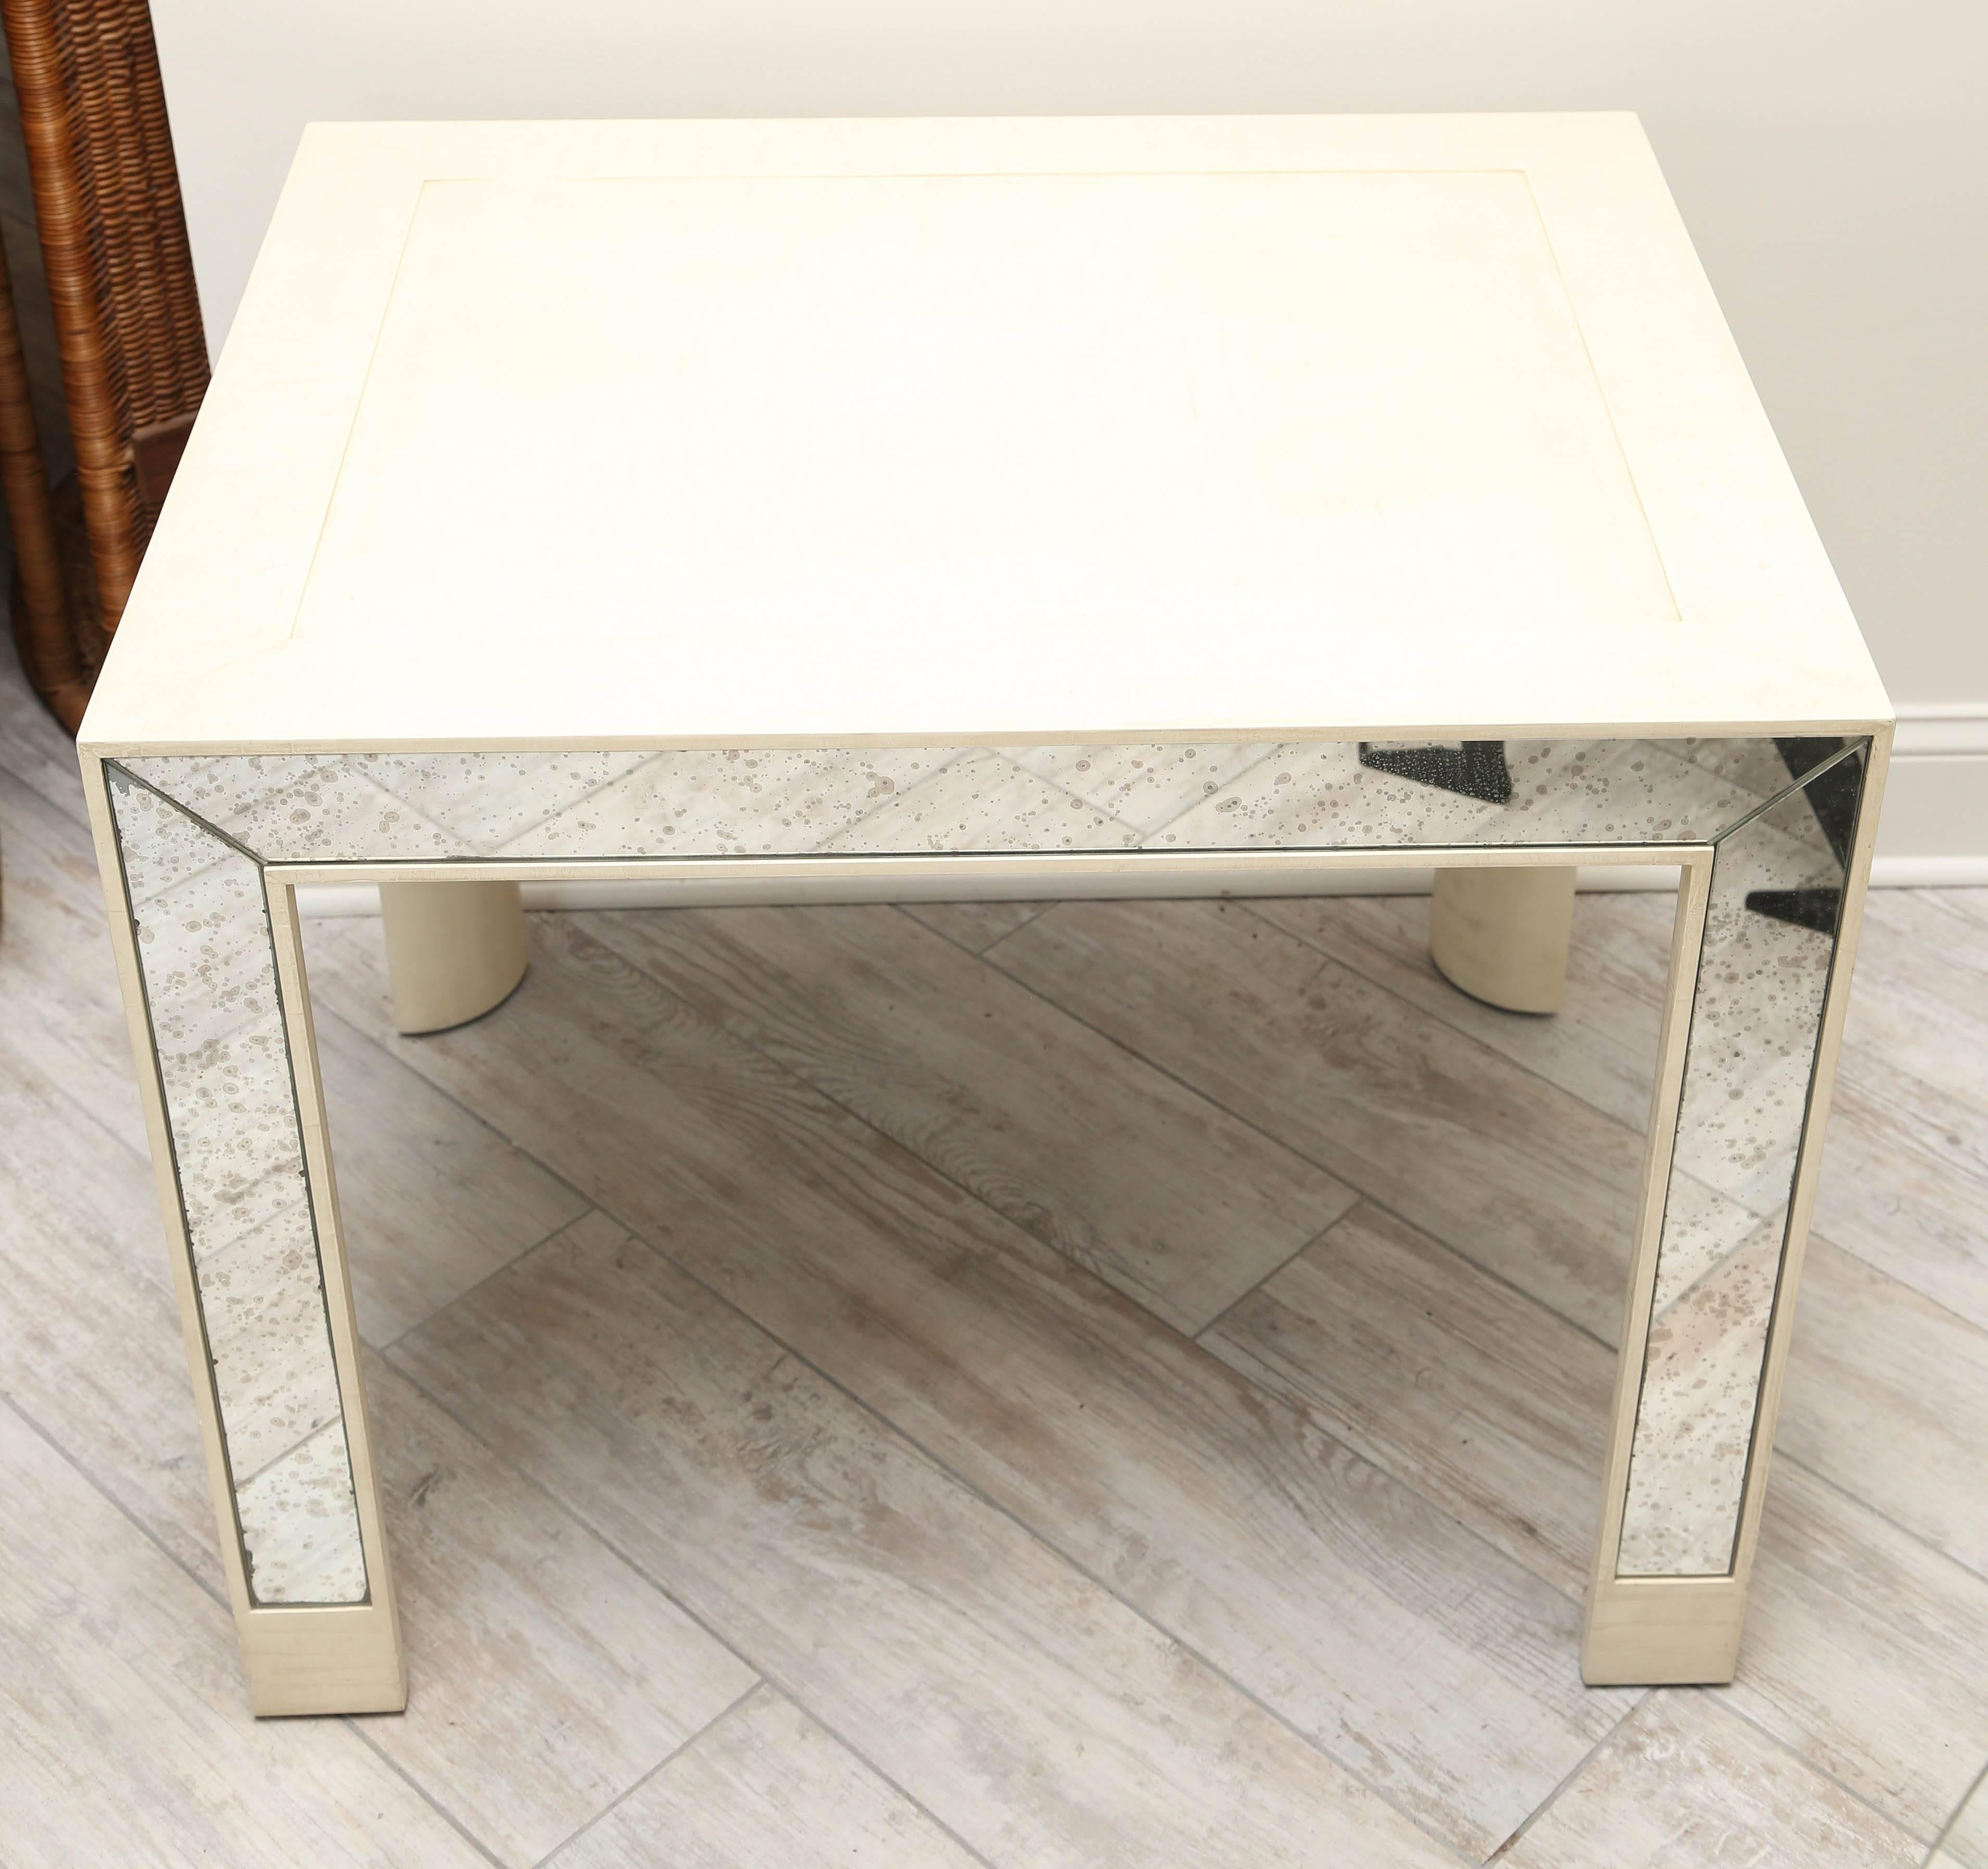 Pair of cream colored parchment finish side tables with mirrored sides and legs.